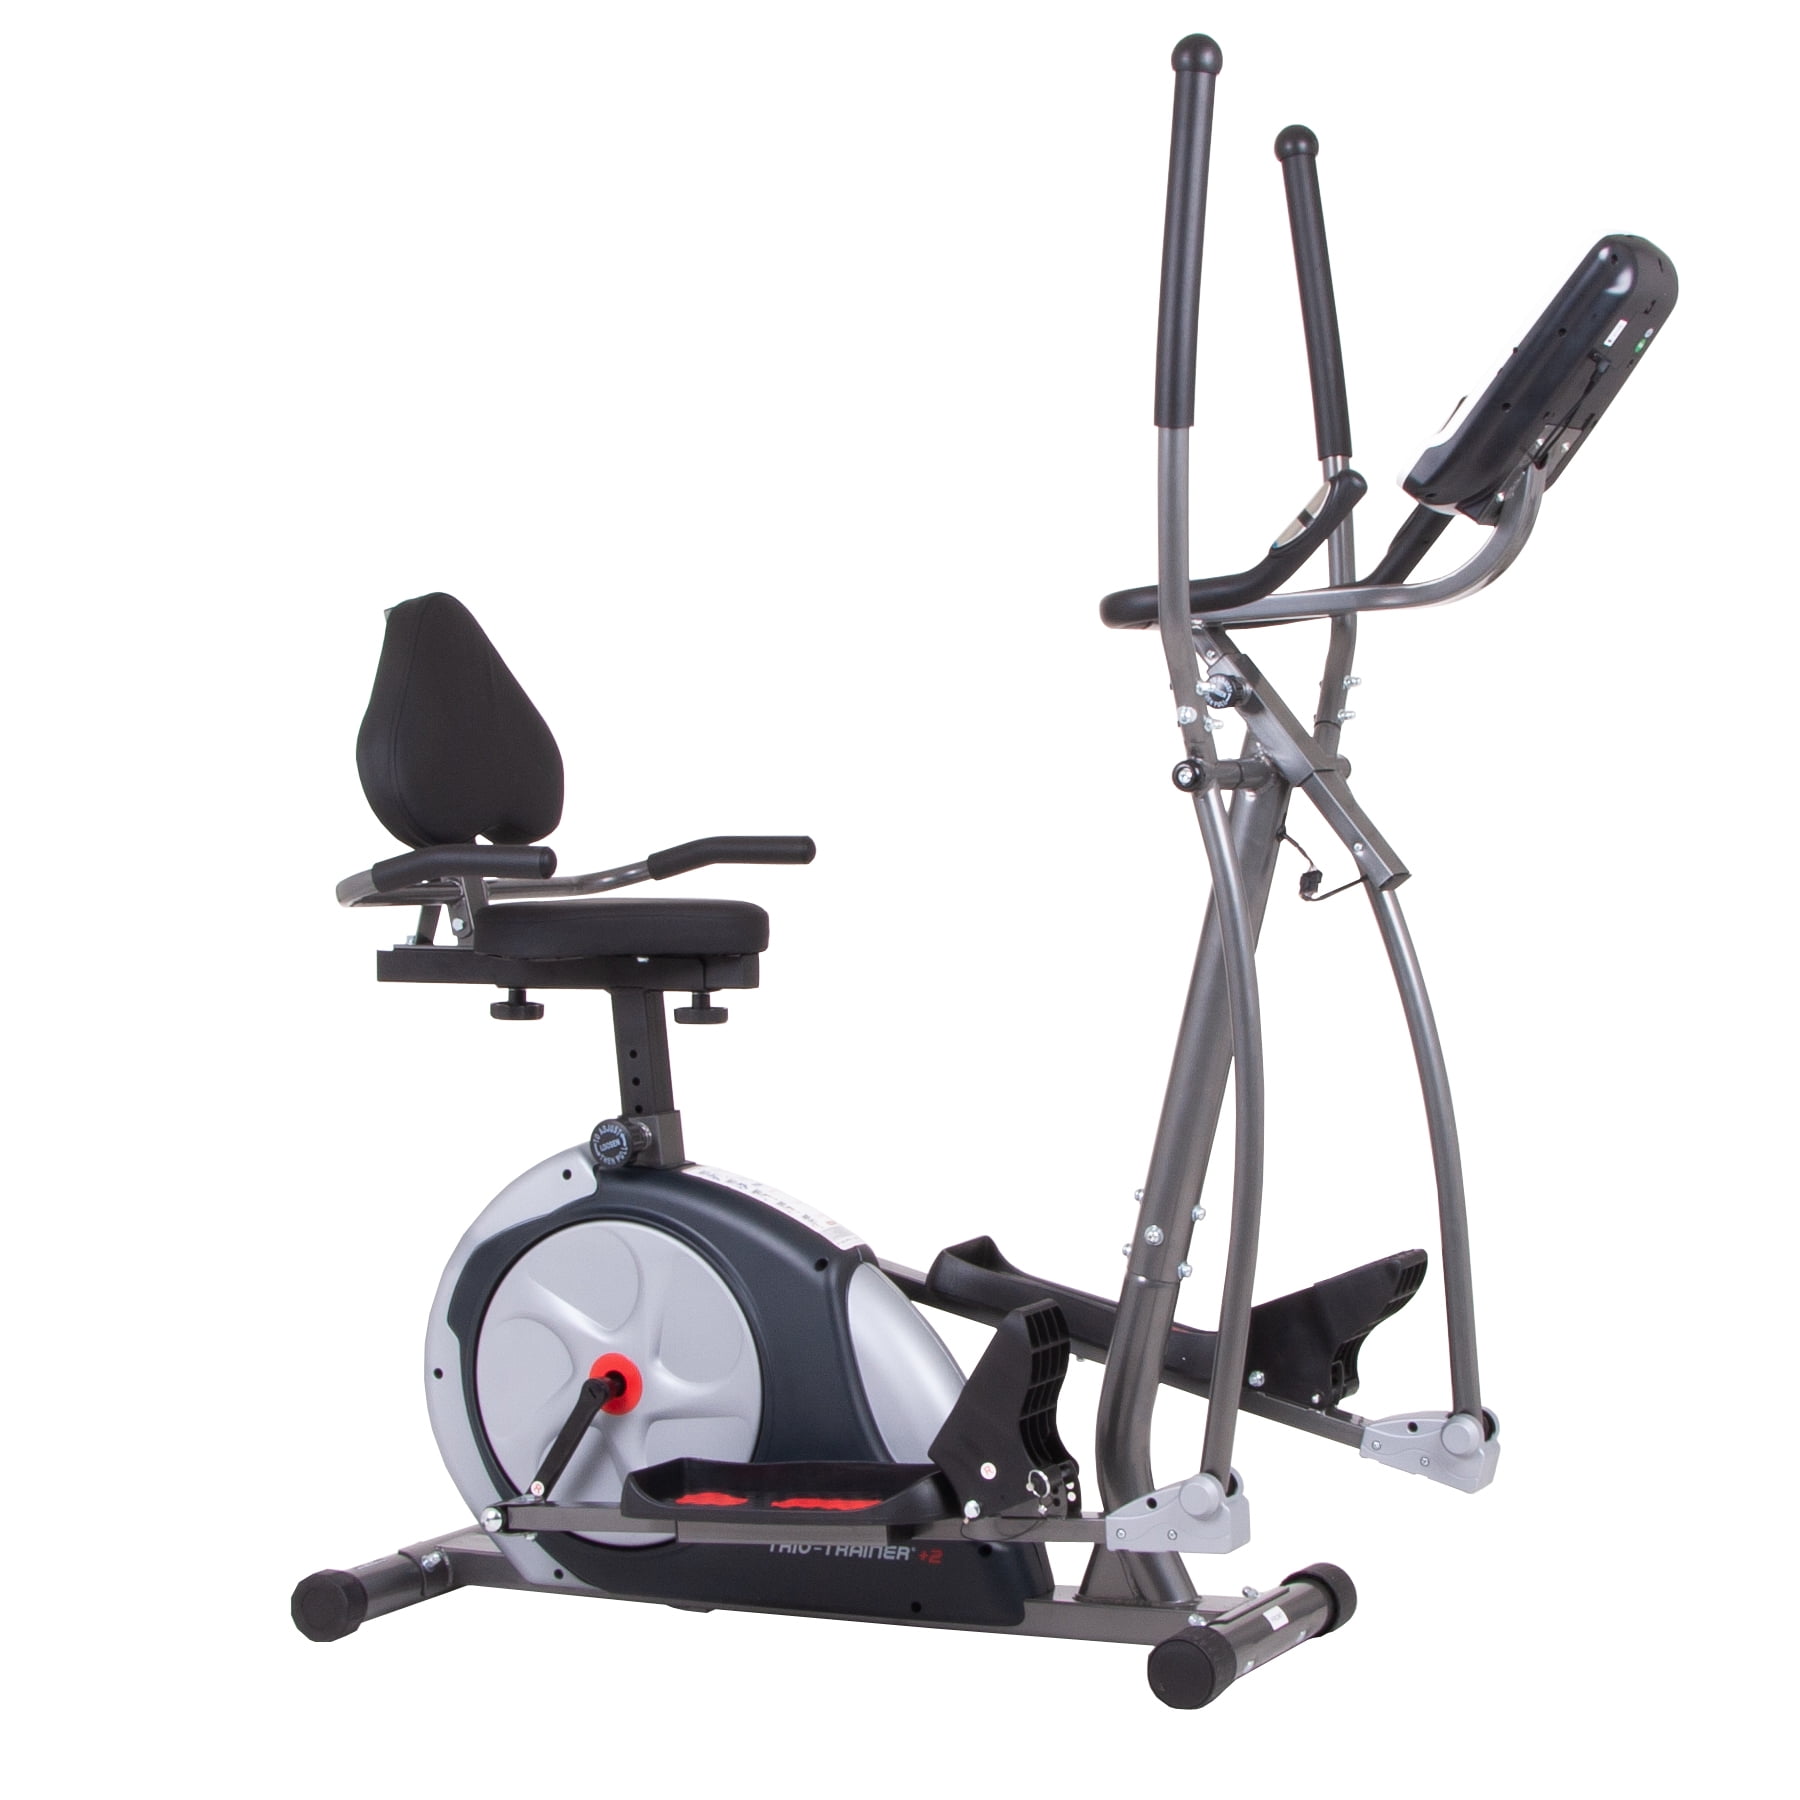 Details about   Magnetic Elliptical Stepper Pedal Exerciser Unlimited Resistance w/ LCD Display 